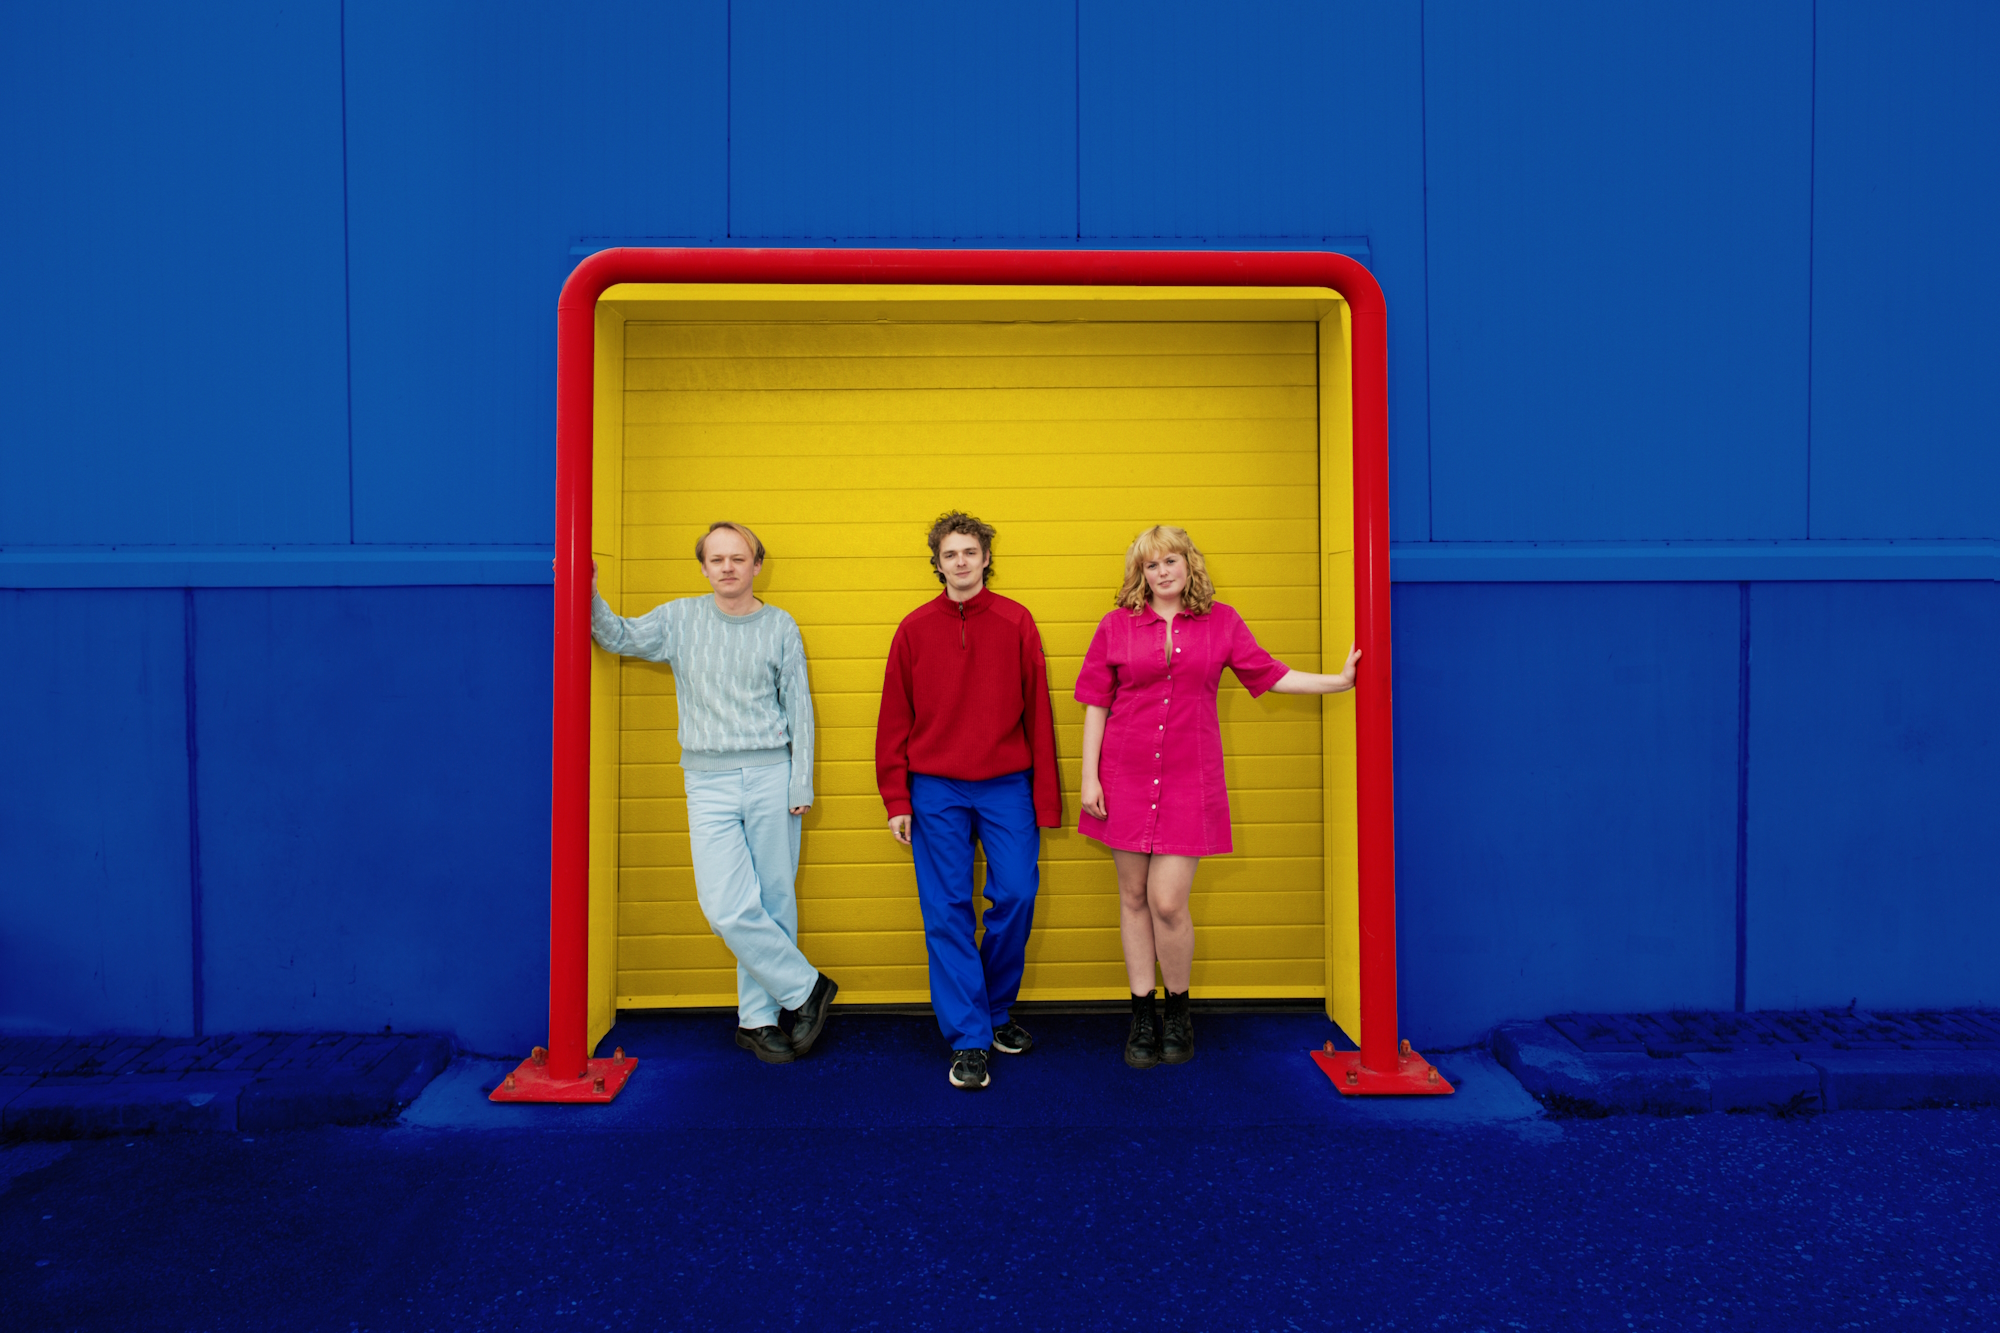 Dutch Indie Band Pip Blom Talk About Their New Electro Direction for Their Upcoming Album “Bobbie,” Working with Franz Ferdinand’s Alex Kapranos on the Lead Single, the Departure of Longtime Drummer Gini Cameron, and Returning to Ireland